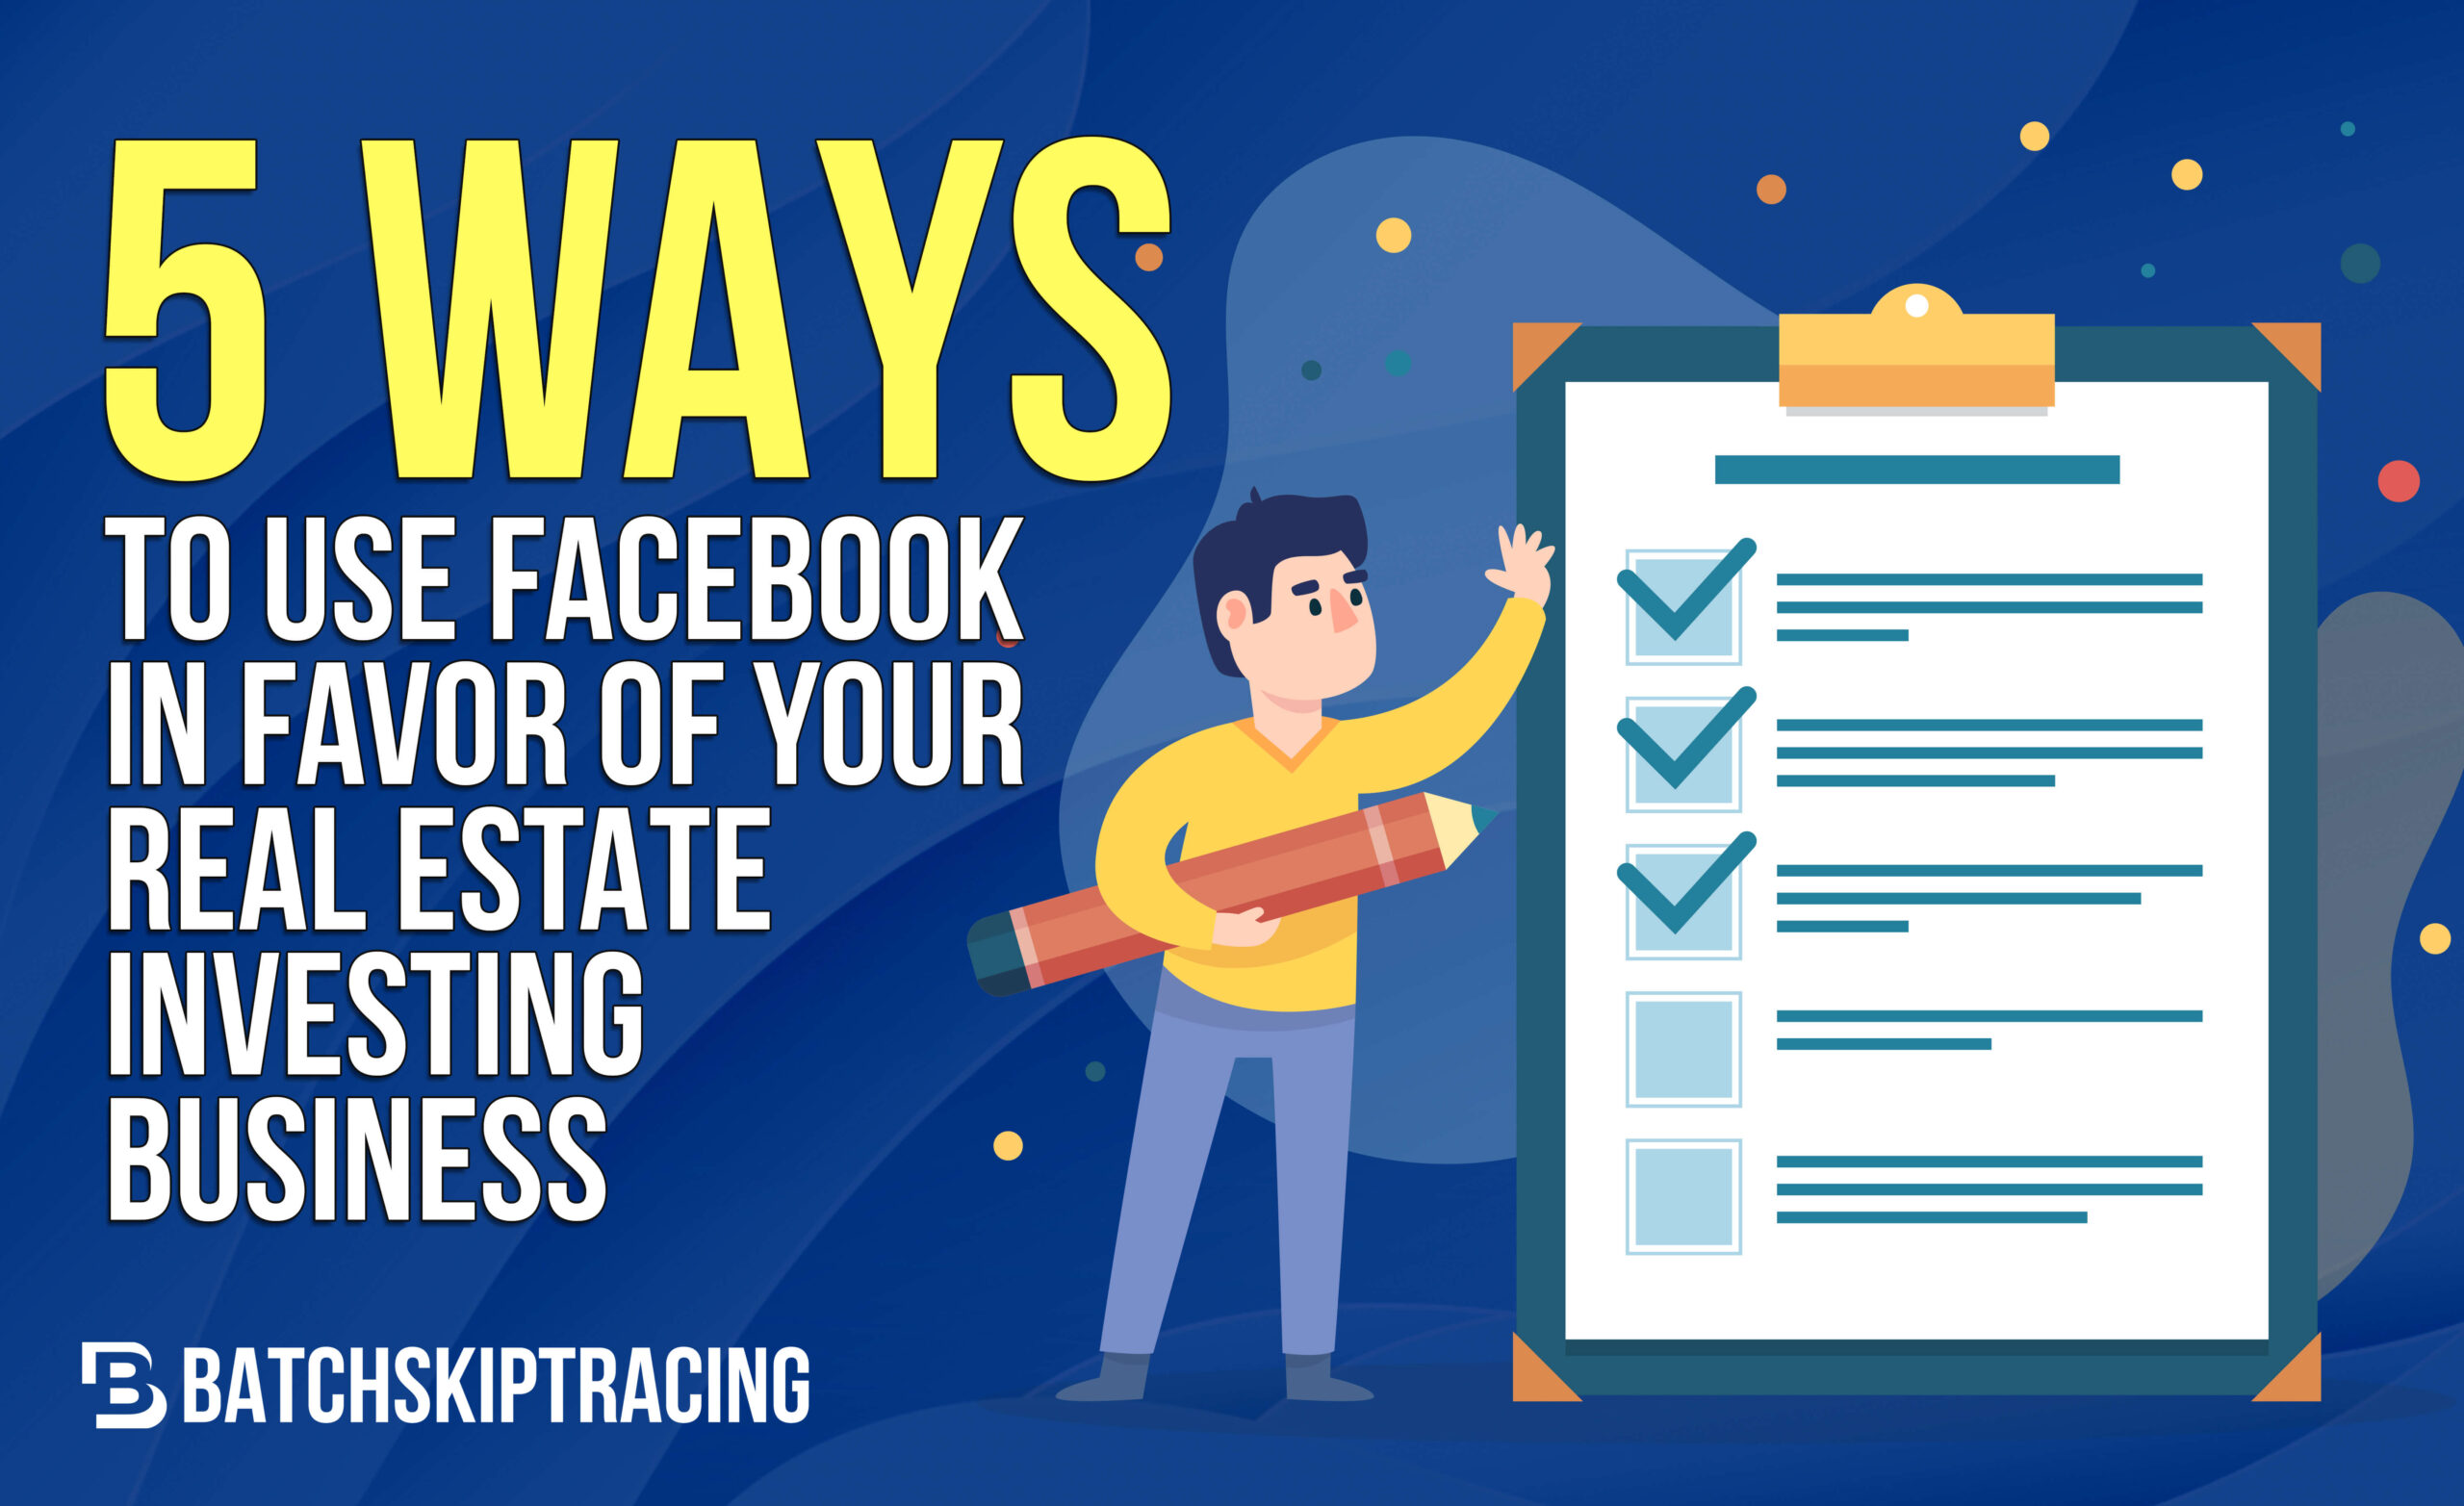 5 Ways to Use Facebook in Favor of Your Real Estate Investing Business